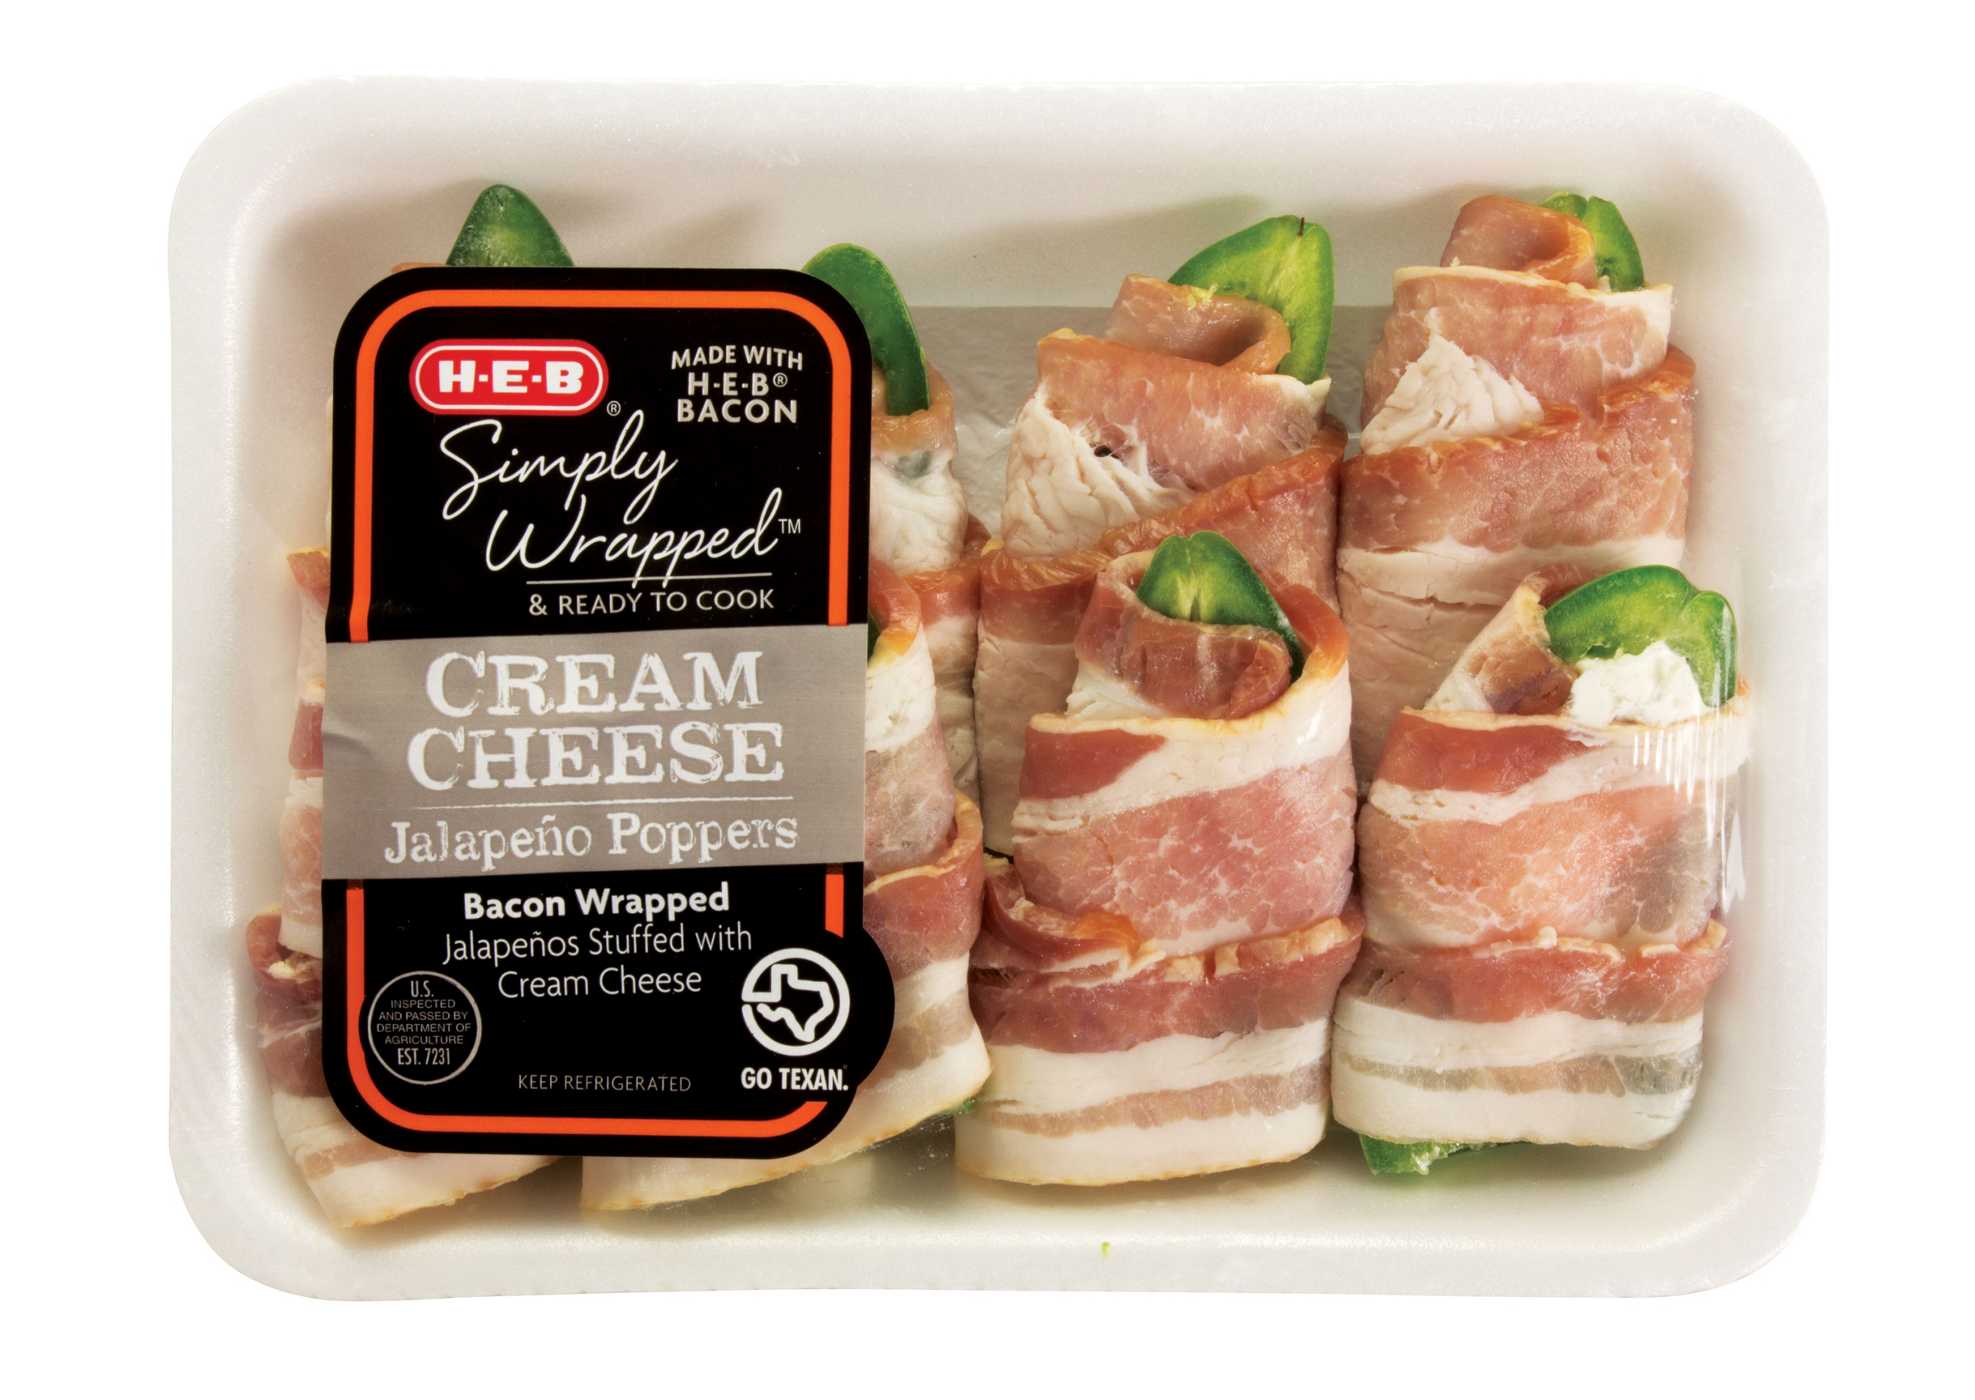 H-E-B Simply Wrapped Cream Cheese Jalapeno Poppers; image 1 of 2